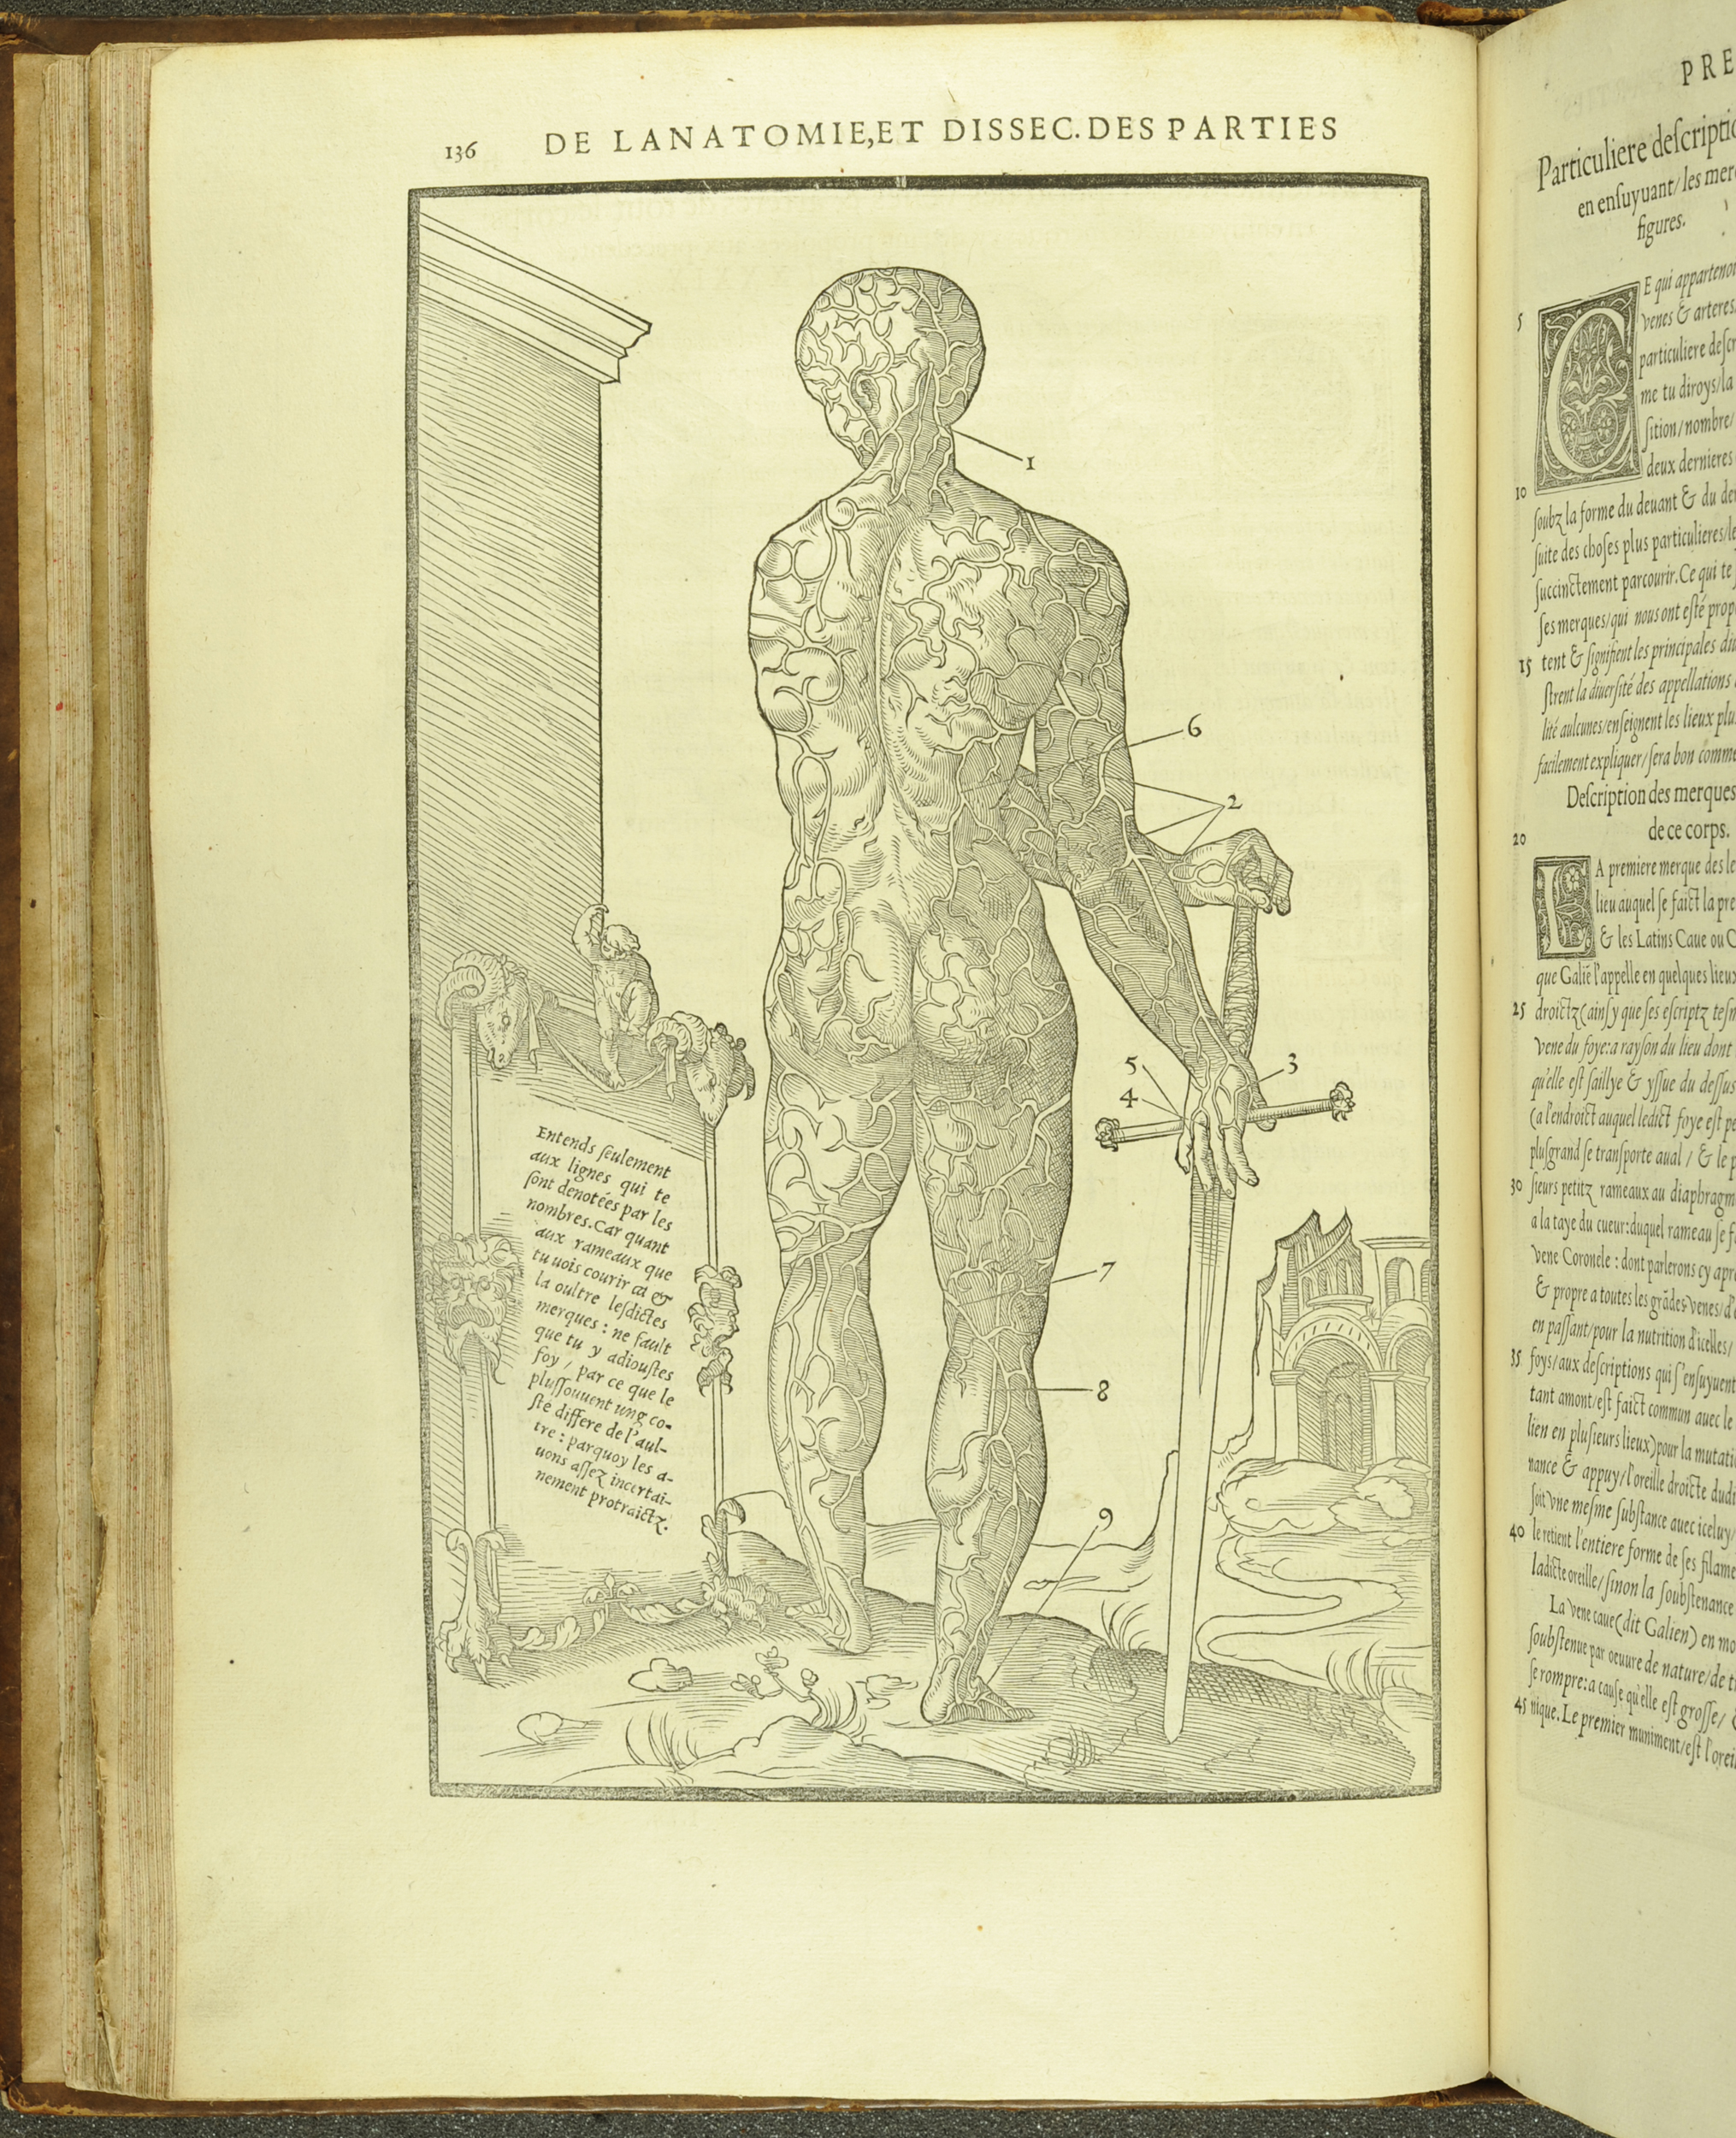 An anatomical diagram of the venous system from Estienne's Anatomy (1546) (St Andrews copy at TypFP.B46CE)